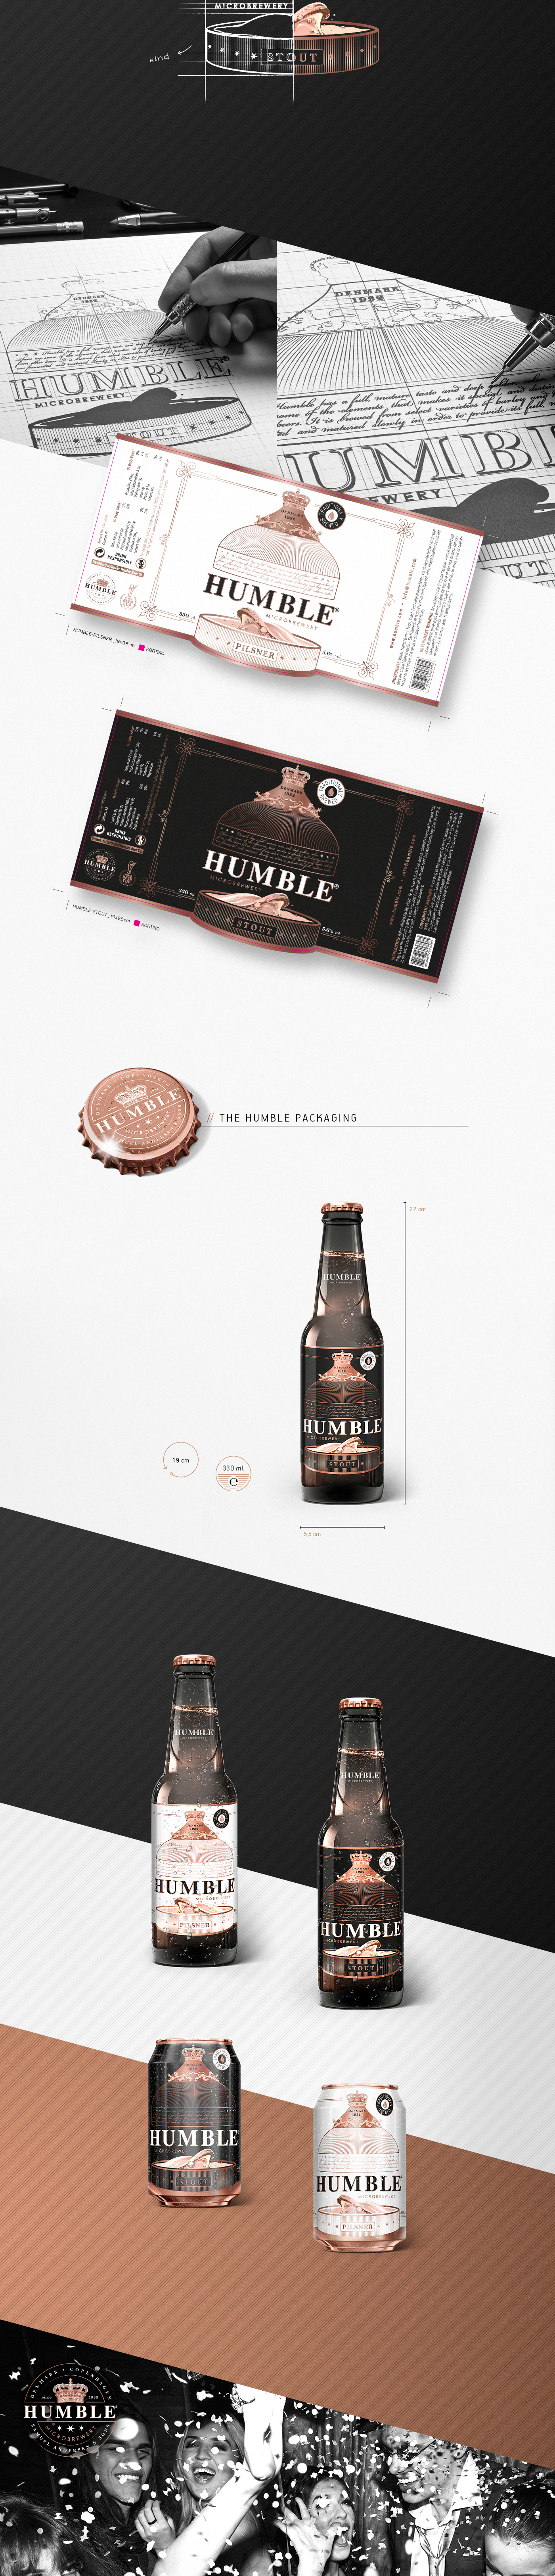 beer brewery logo corporate design Label brand manual alcohol Packaging bottle